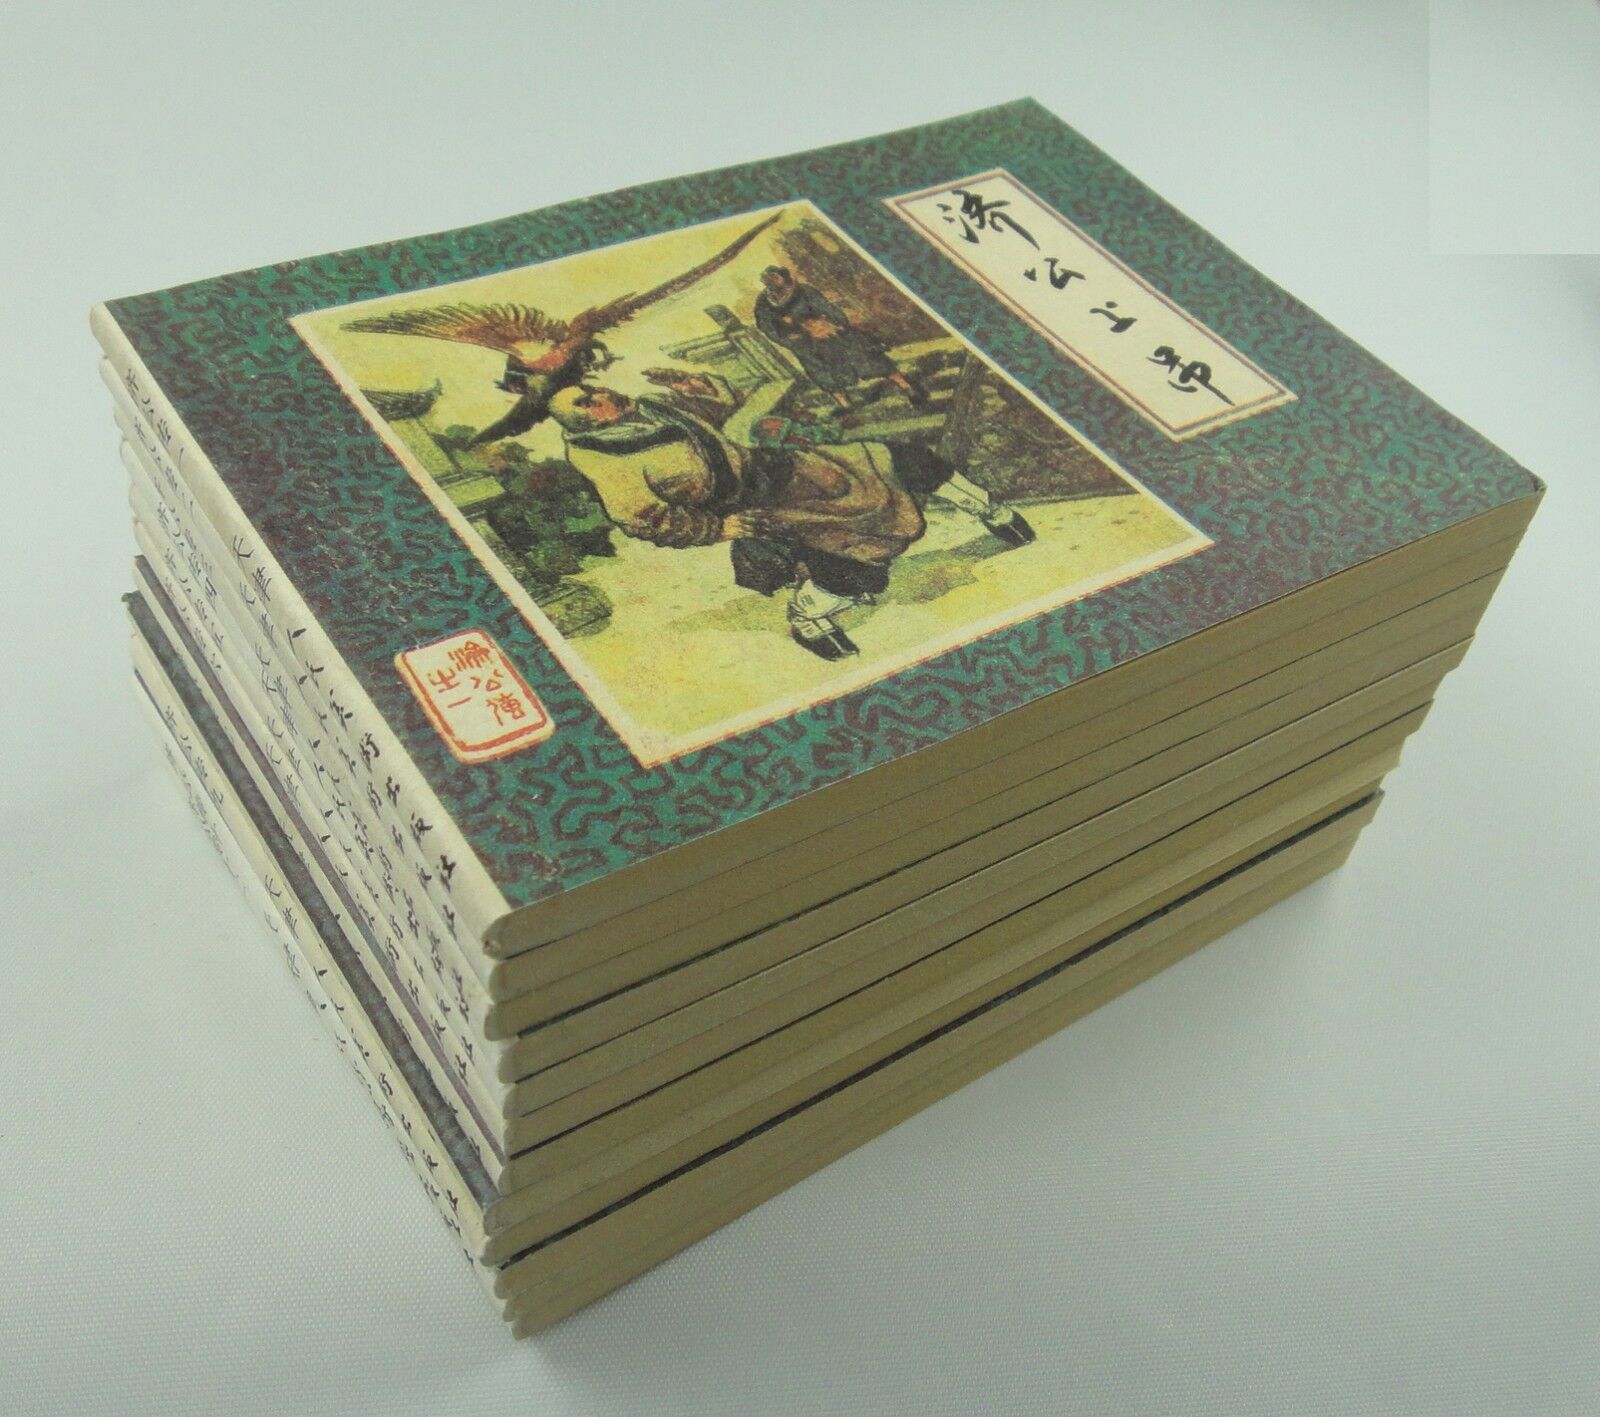 Set of 12 Volumes China Comic Strip in Chinese:The Legend of Crazy Monk